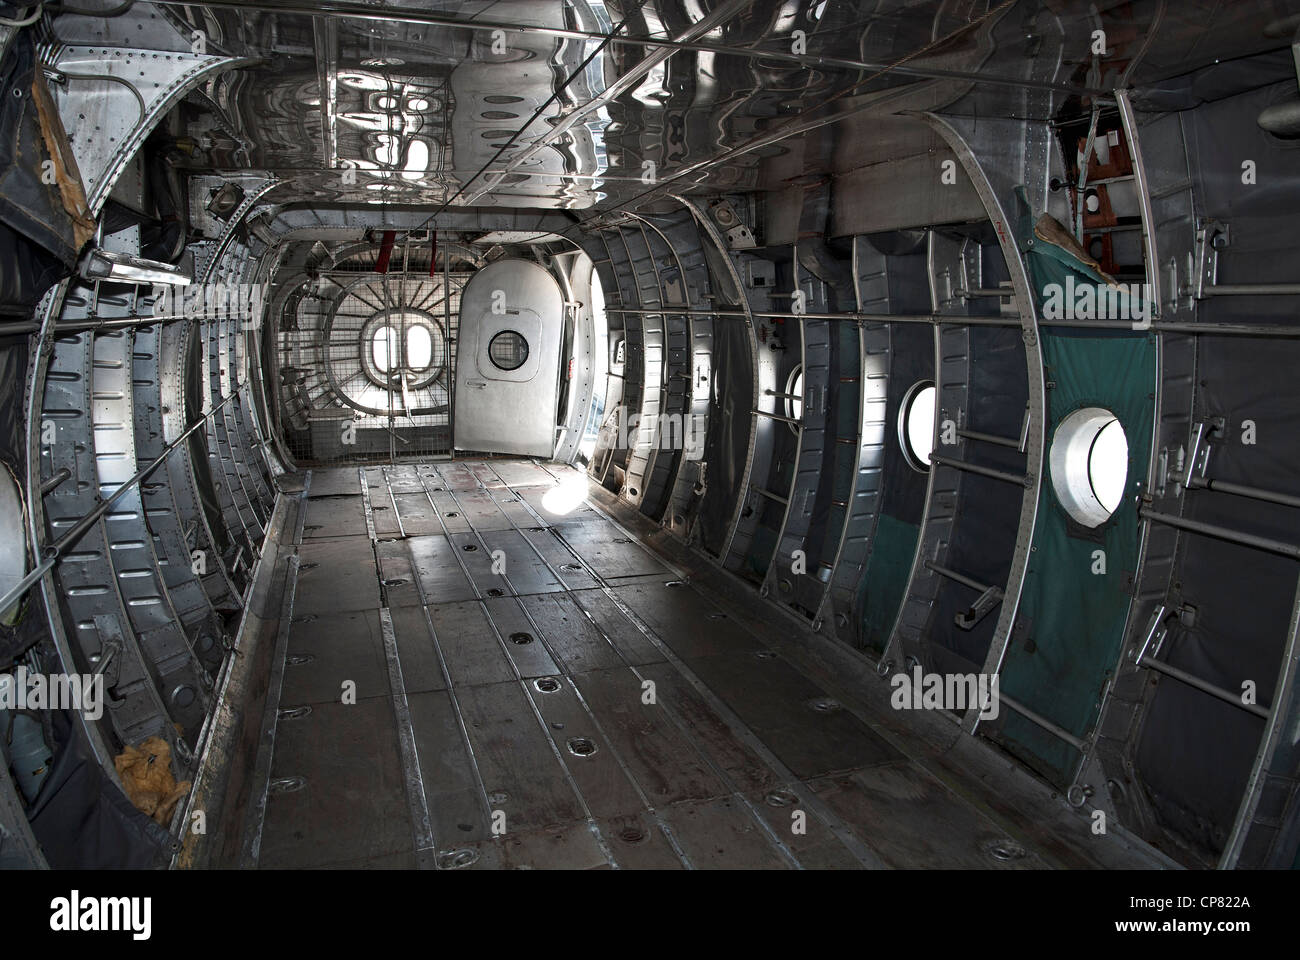 Hold of an old military transport aircraft. Stock Photo